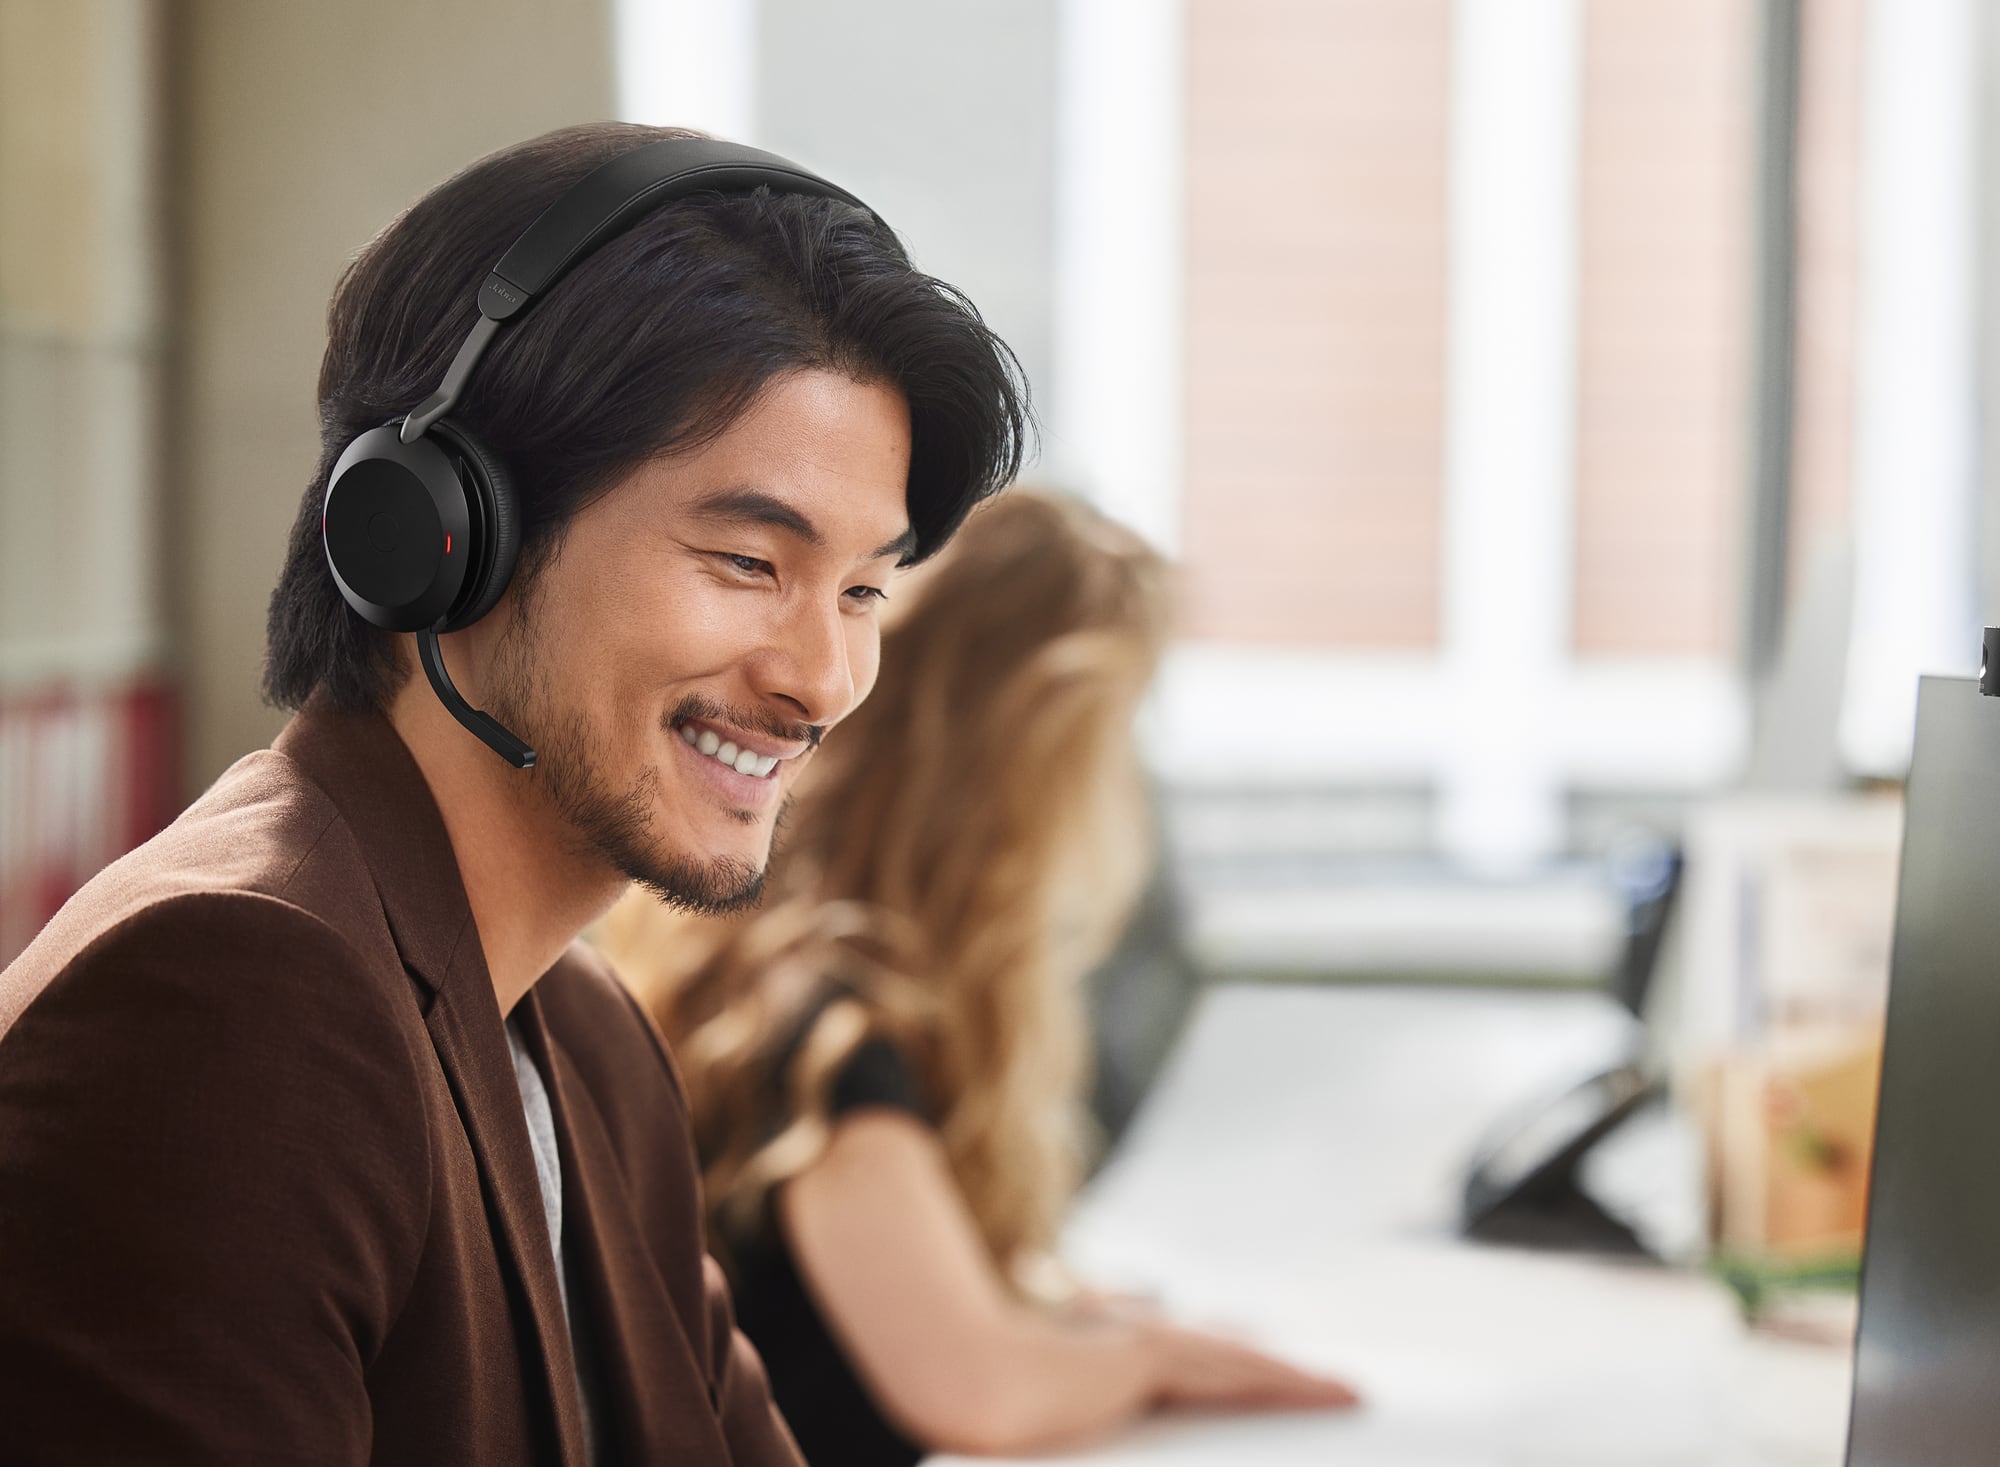 AND BUSINESS HEADSETS | SourceIT WIRED WIRELESS FOR